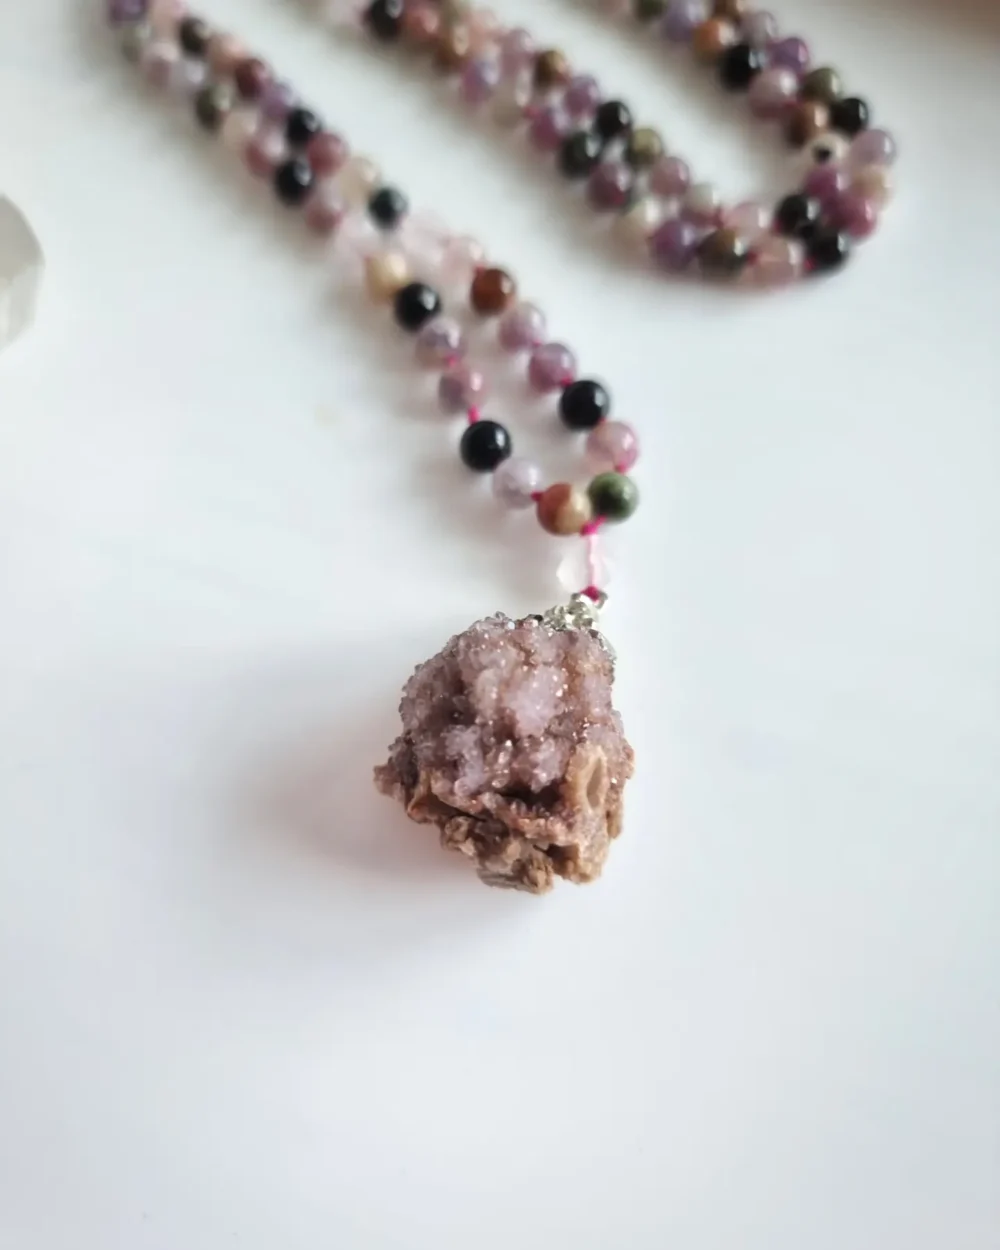 Spirit Quartz Pendant Necklace with Rose Quartz and Tourmaline with Pink thread. Necklace for Joy, Peace and Protection